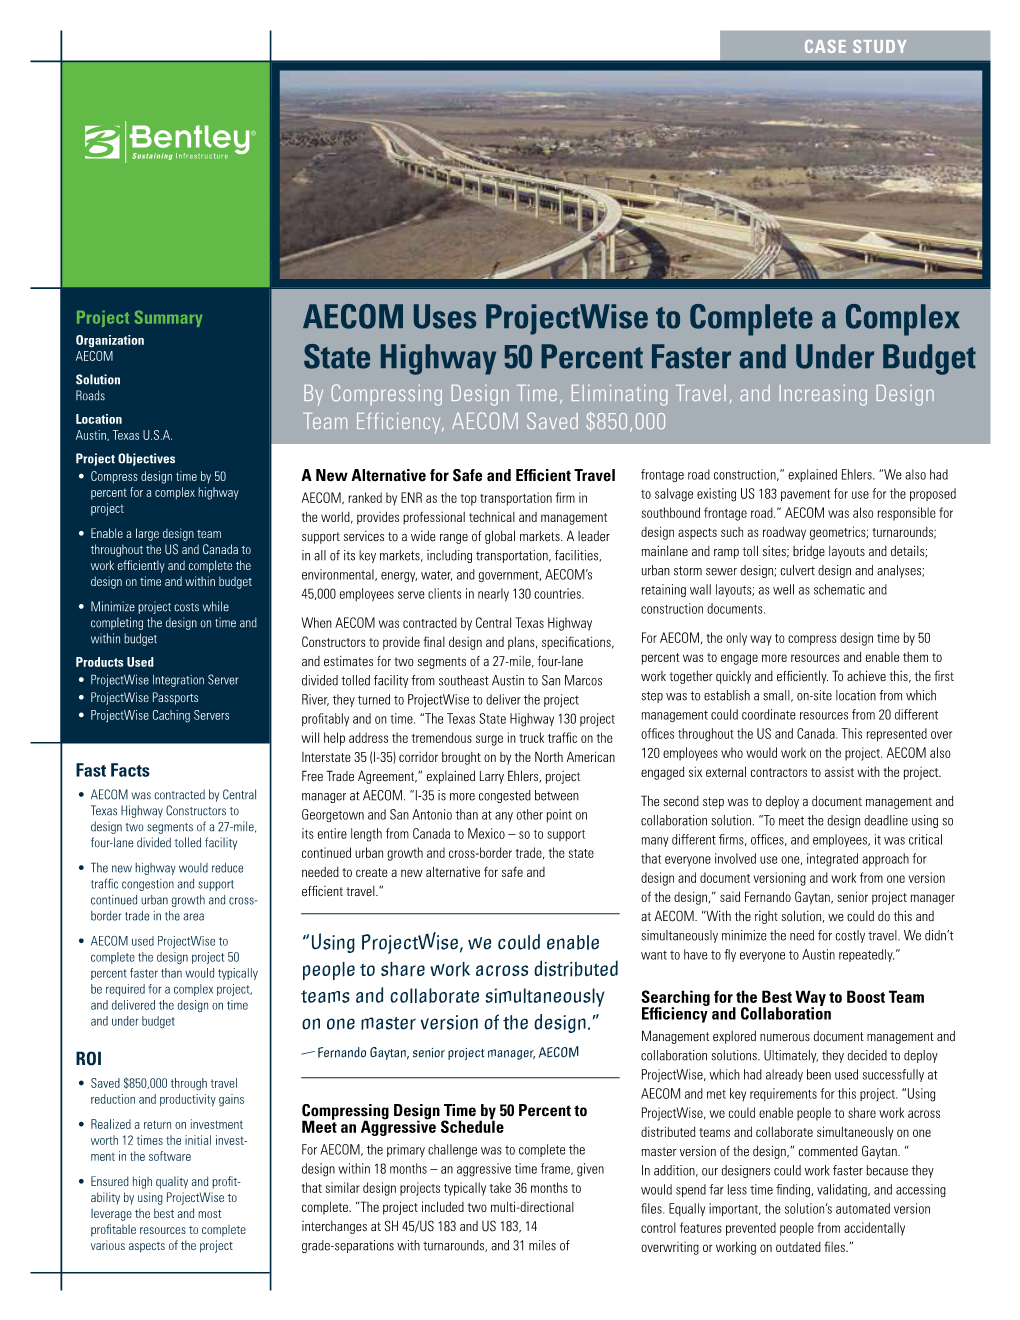 Aecom Uses Projectwise to Complete a Complex State Highway 50